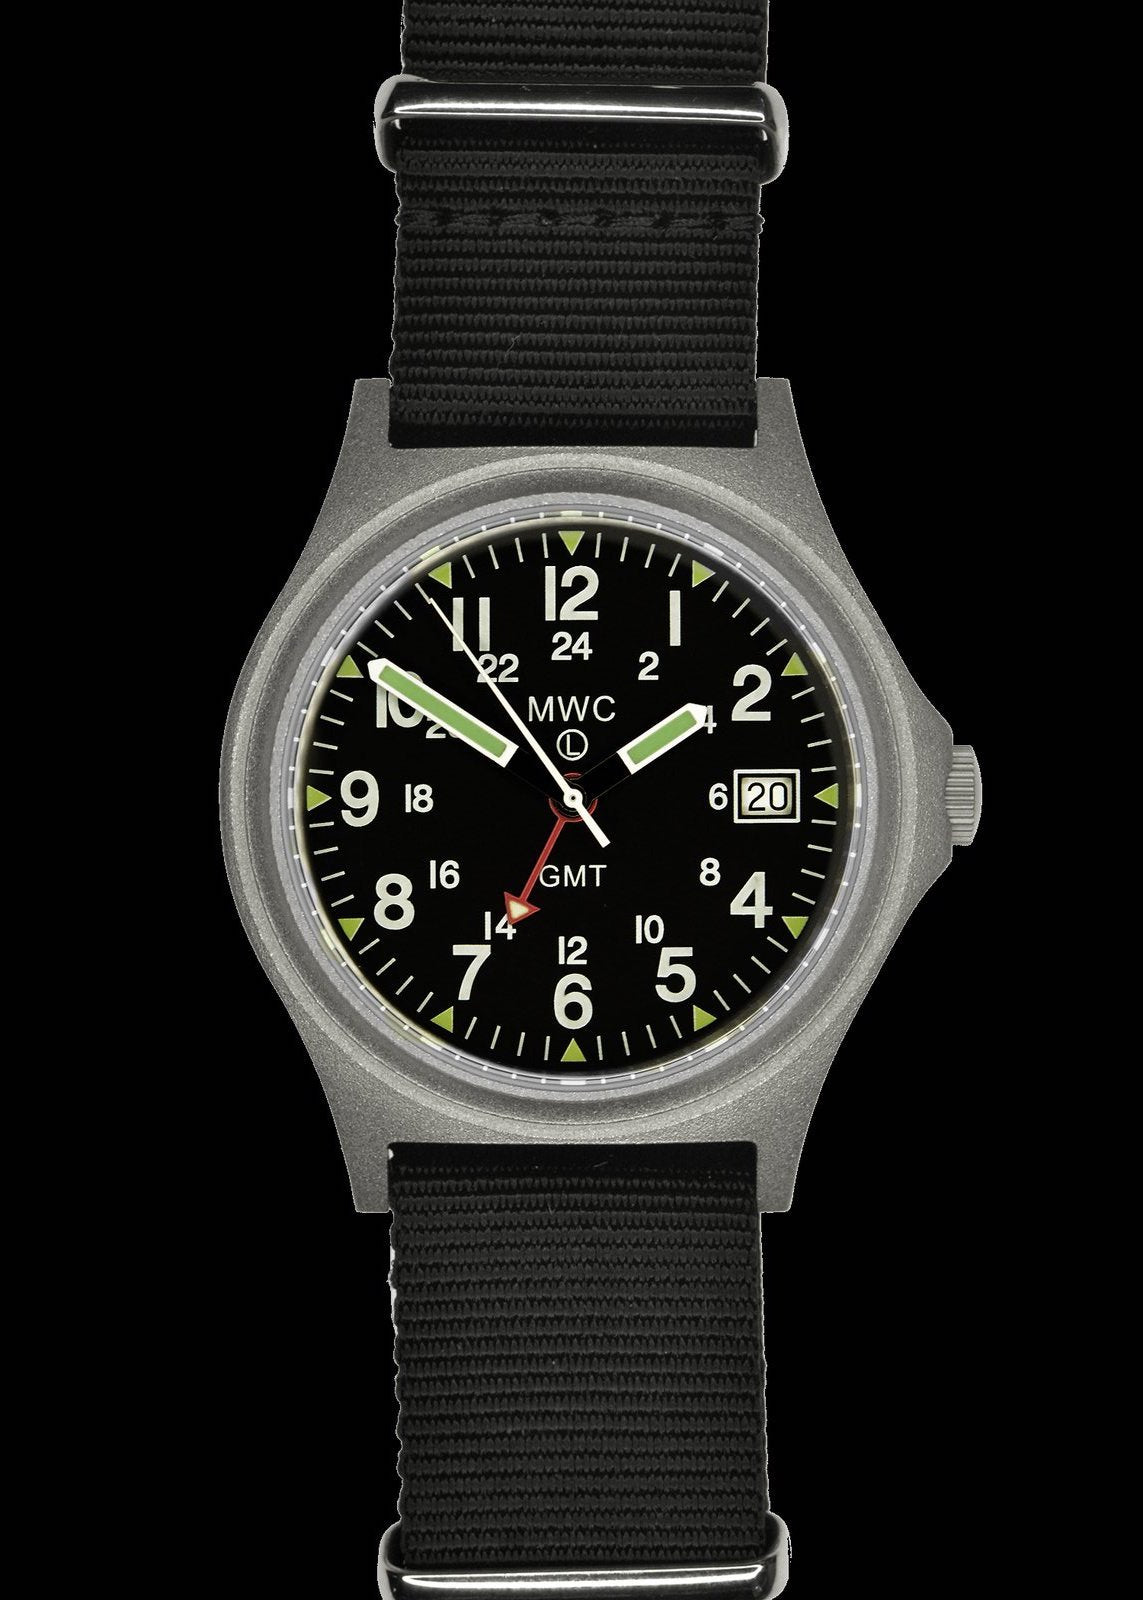 Mwc Gmt Dual Time Zone Water Resistant Military Watch In Stainless S Military Watch Company